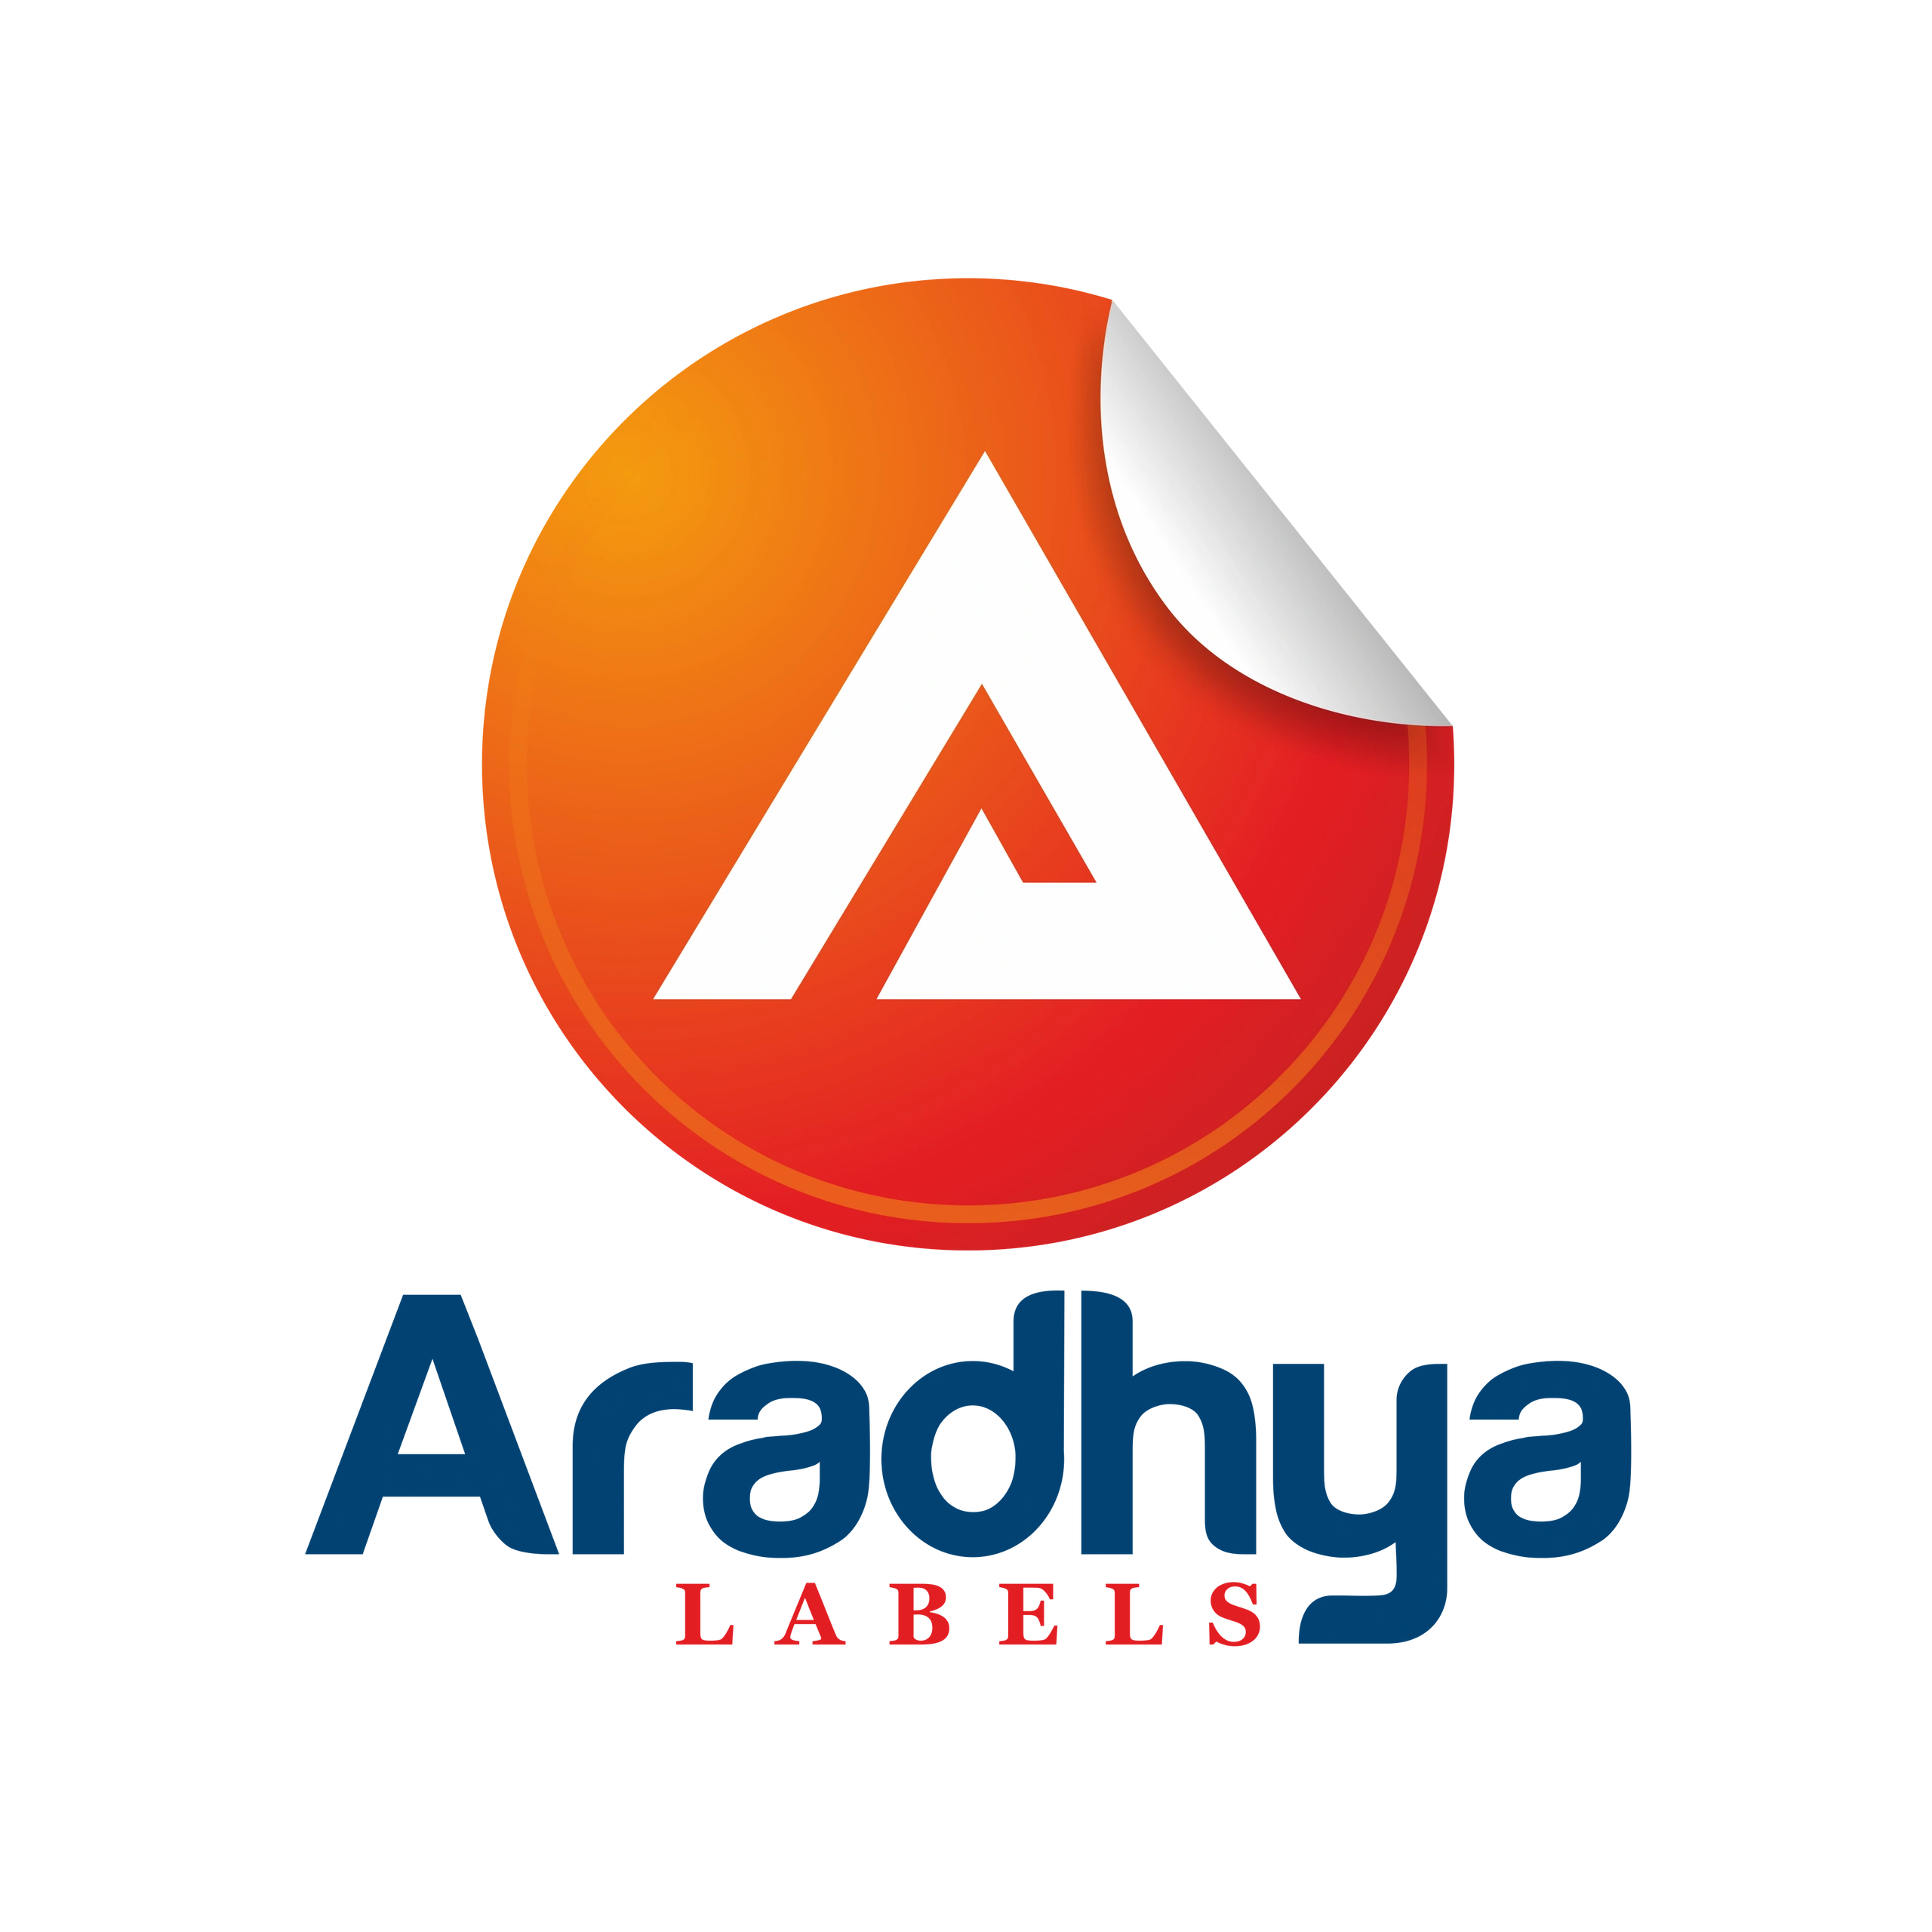 ARADHYA LABELS PRIVATE LIMITED